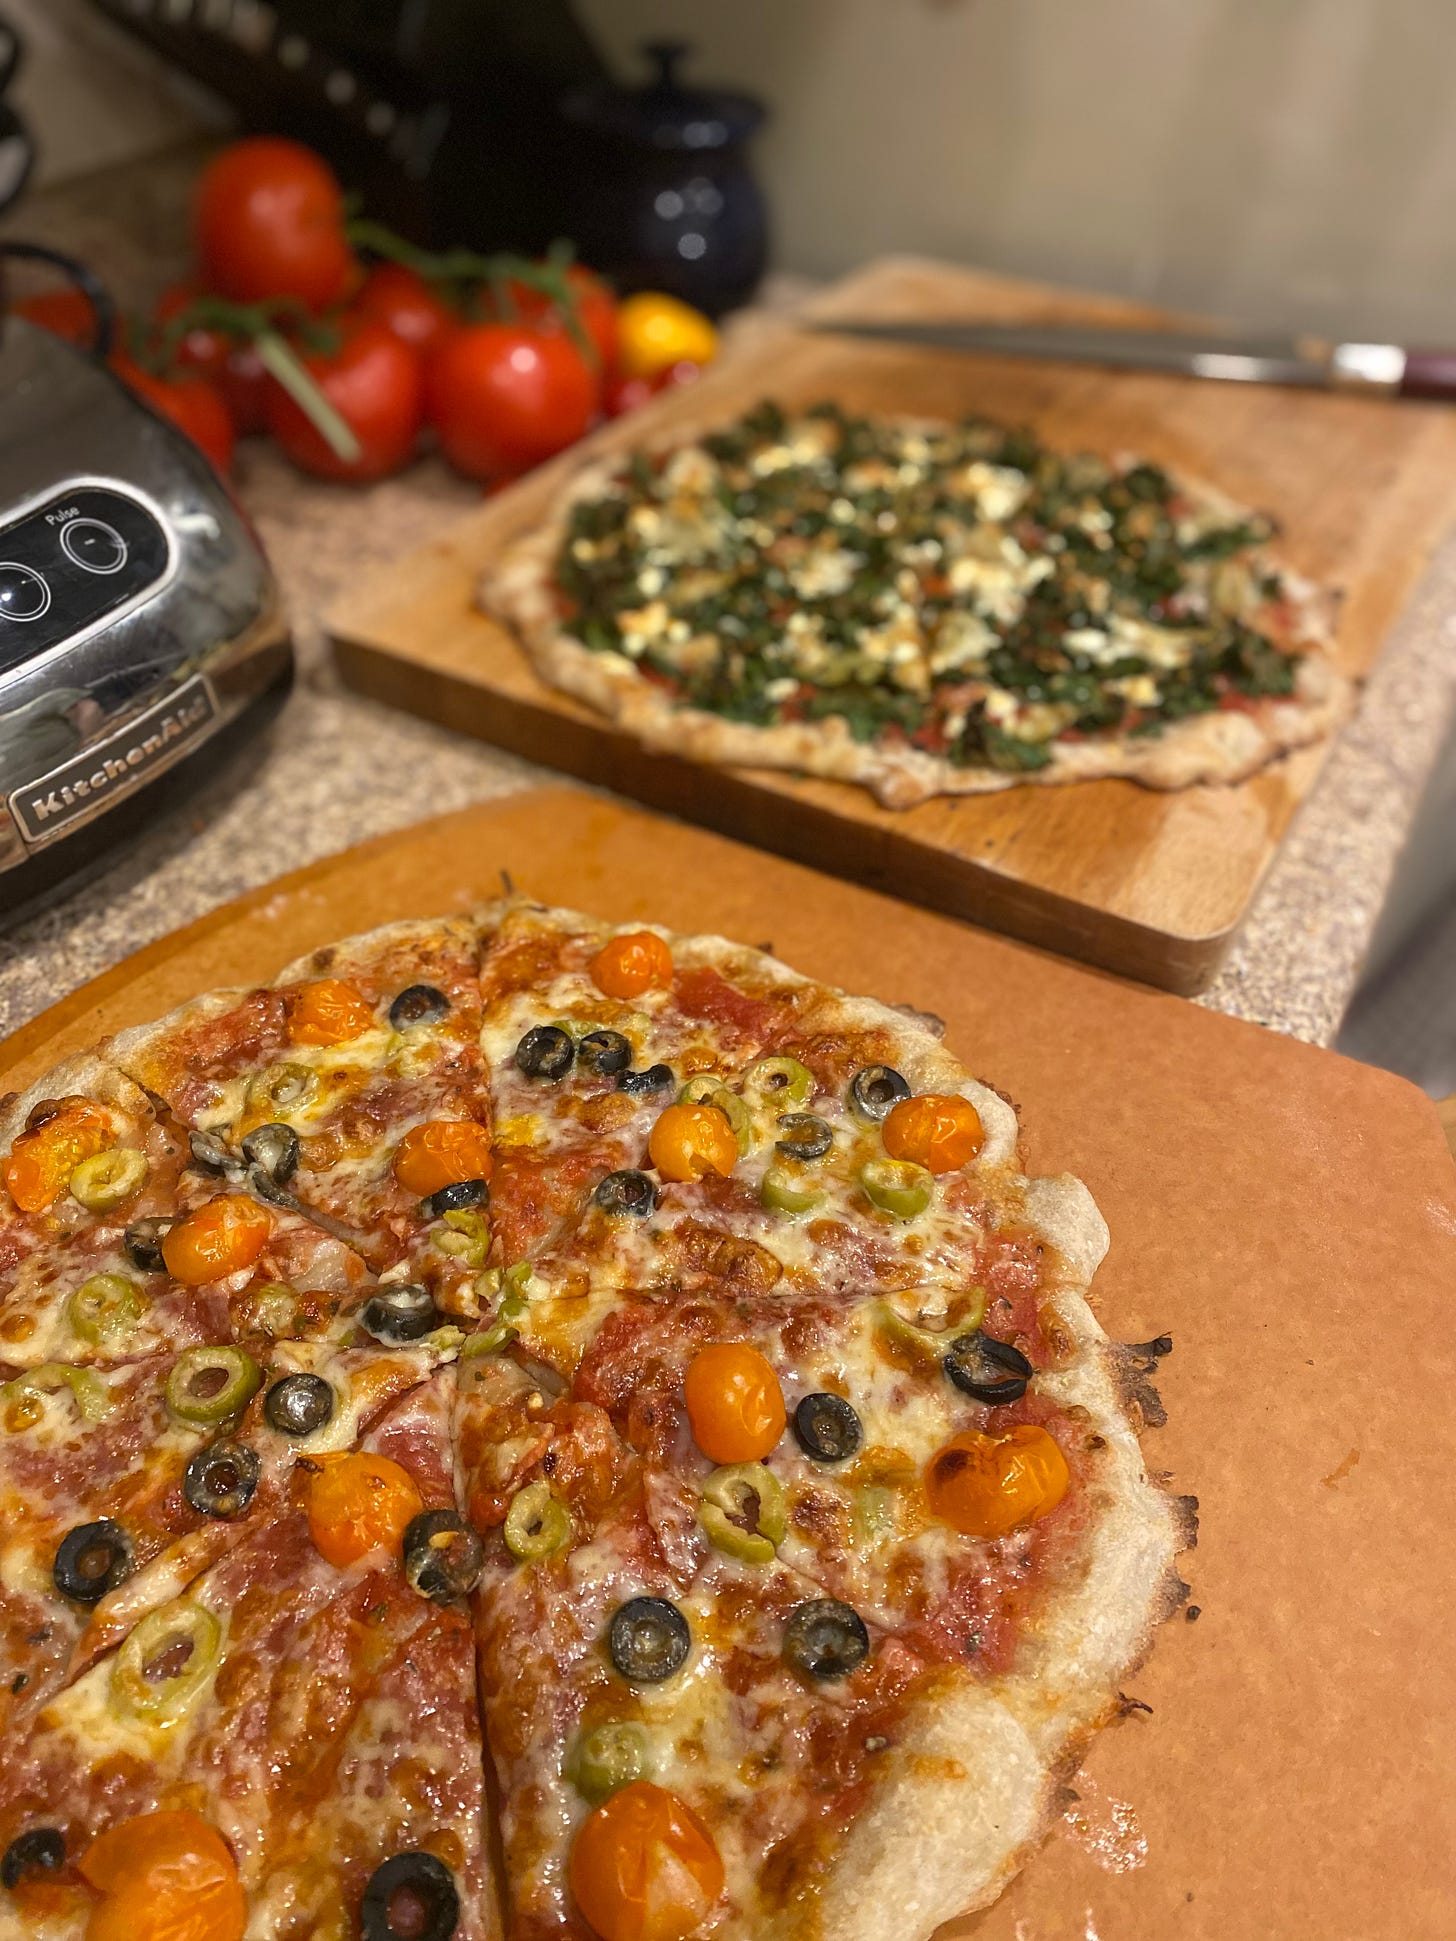 Two pizzas, one on the pizza paddle in the foreground and one on the cutting board in the background. The one in the foreground has salami, sungold tomatoes, and black and green olives. In the background the pizza is blurred, but it is visibly covered in kale and feta.